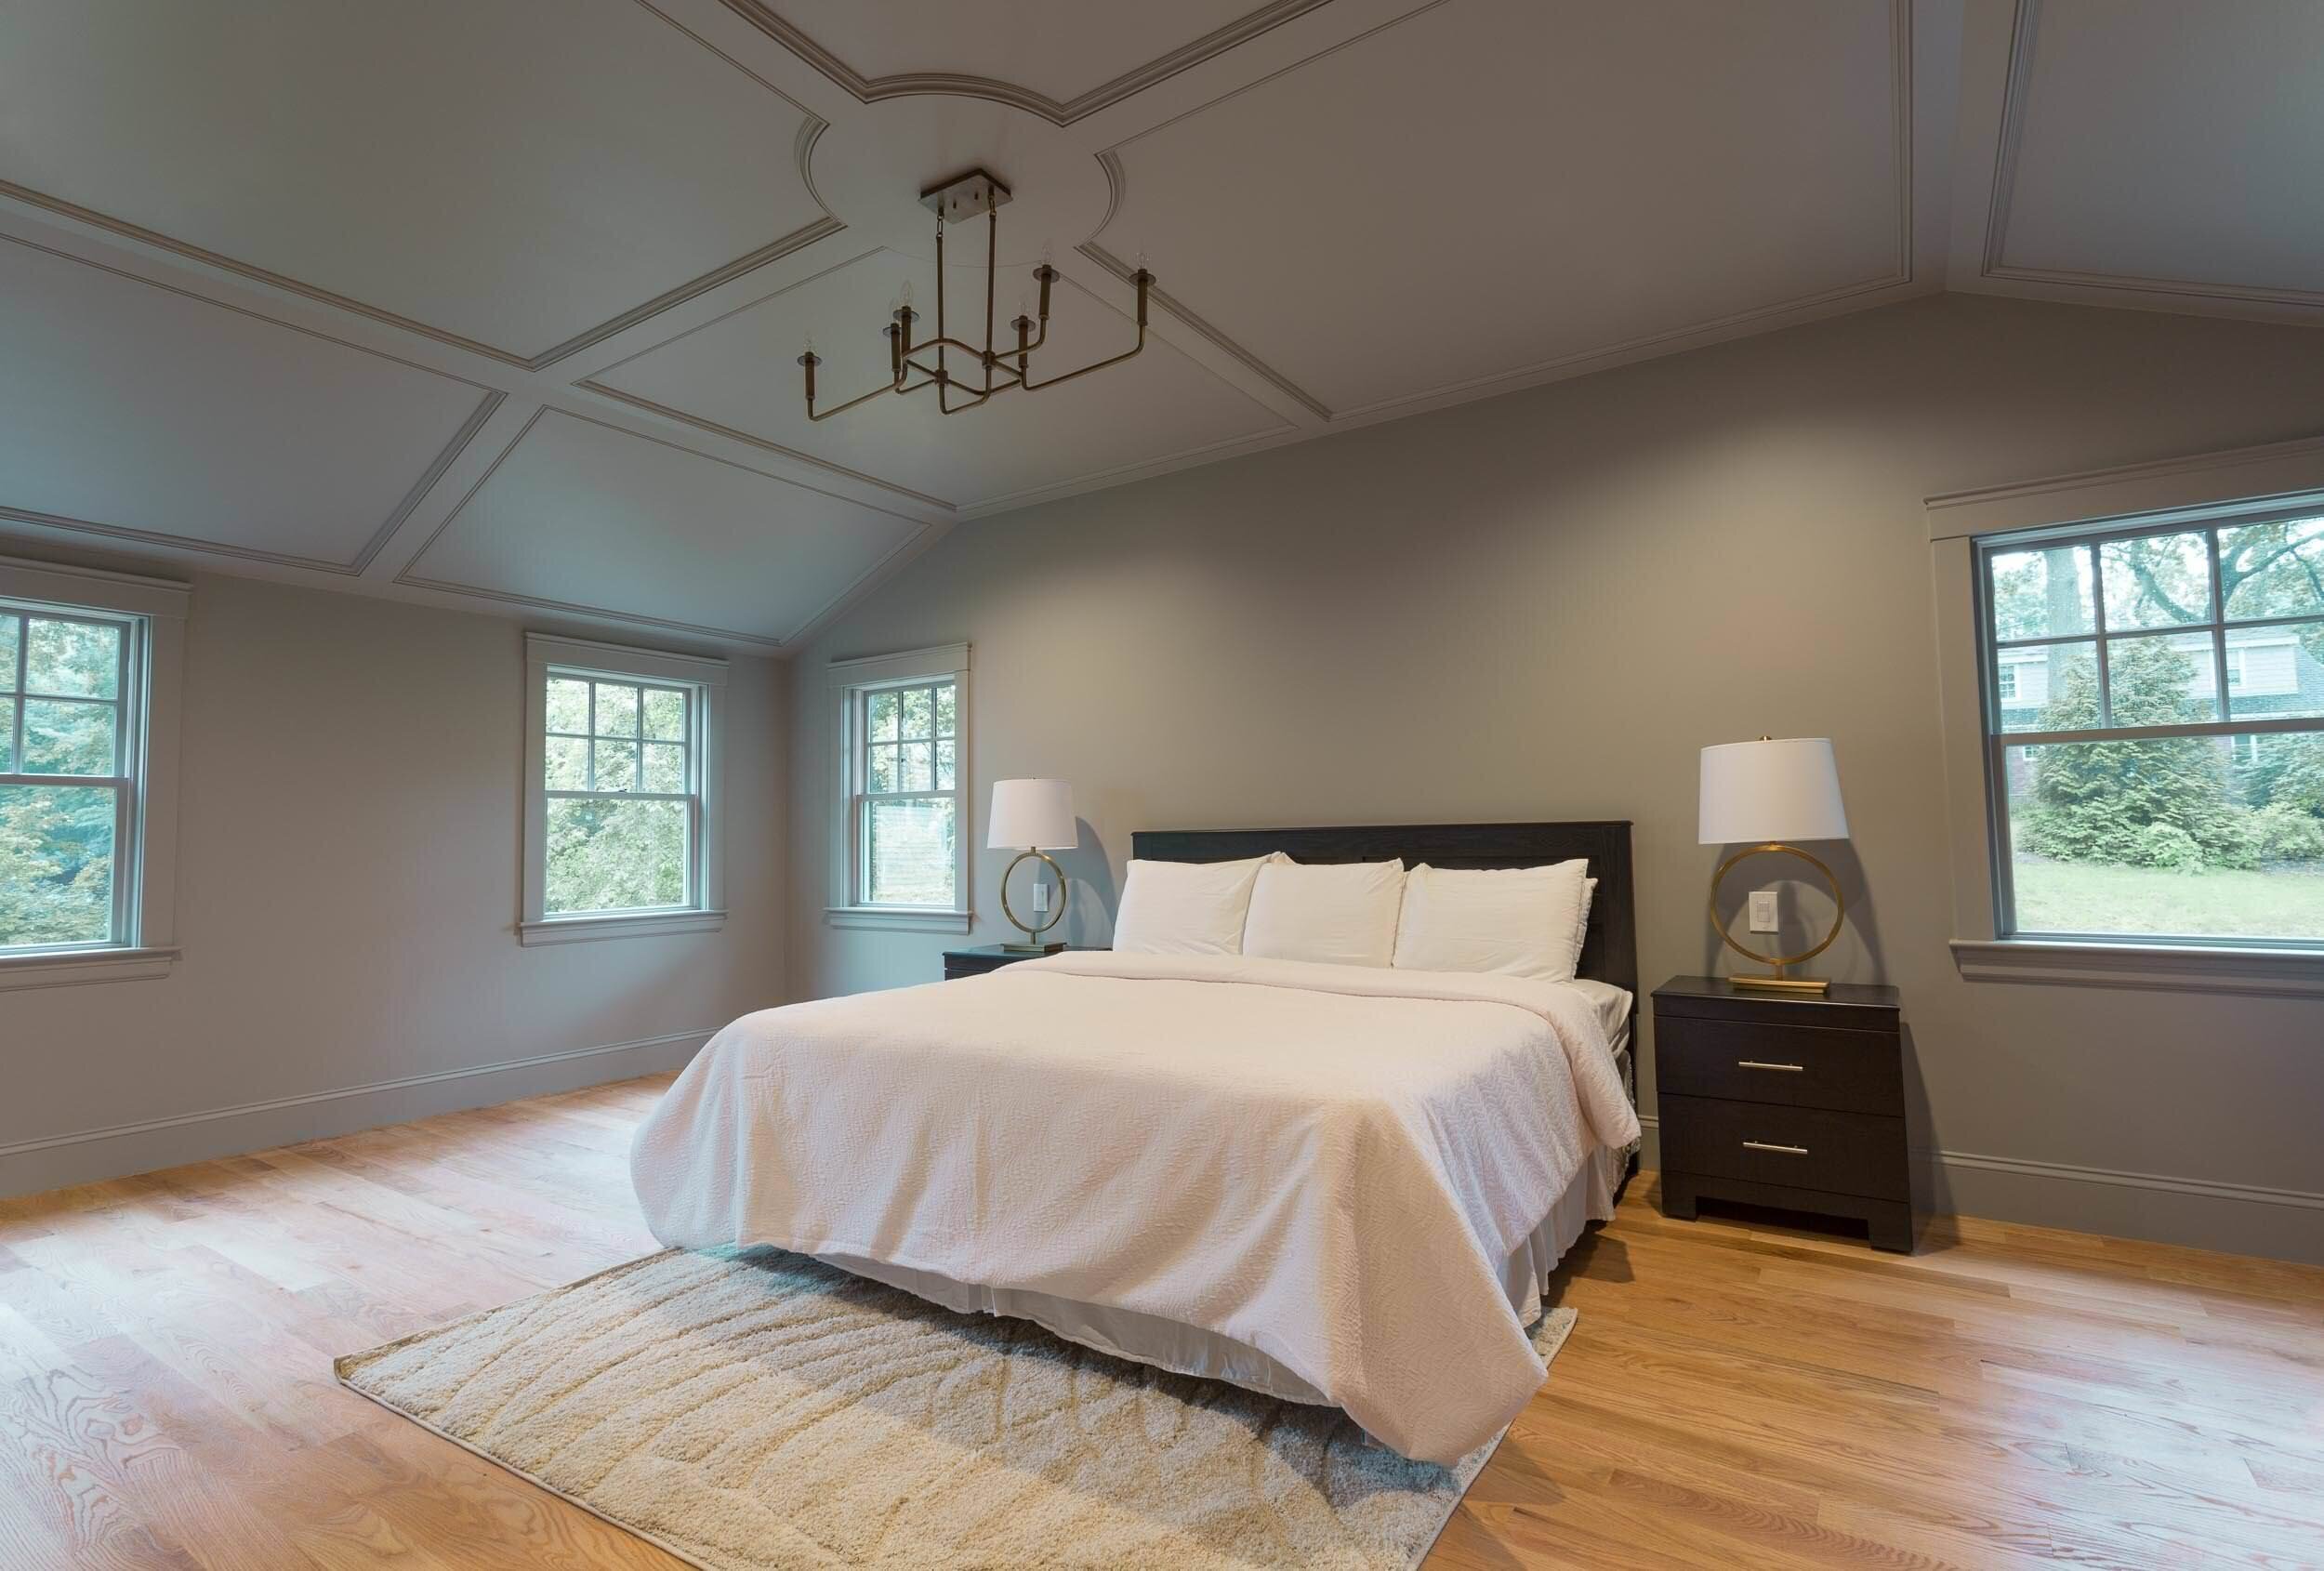 5 Ways To Paint Your Ceiling In 2020, What Is The Best Color To Paint Your Ceiling